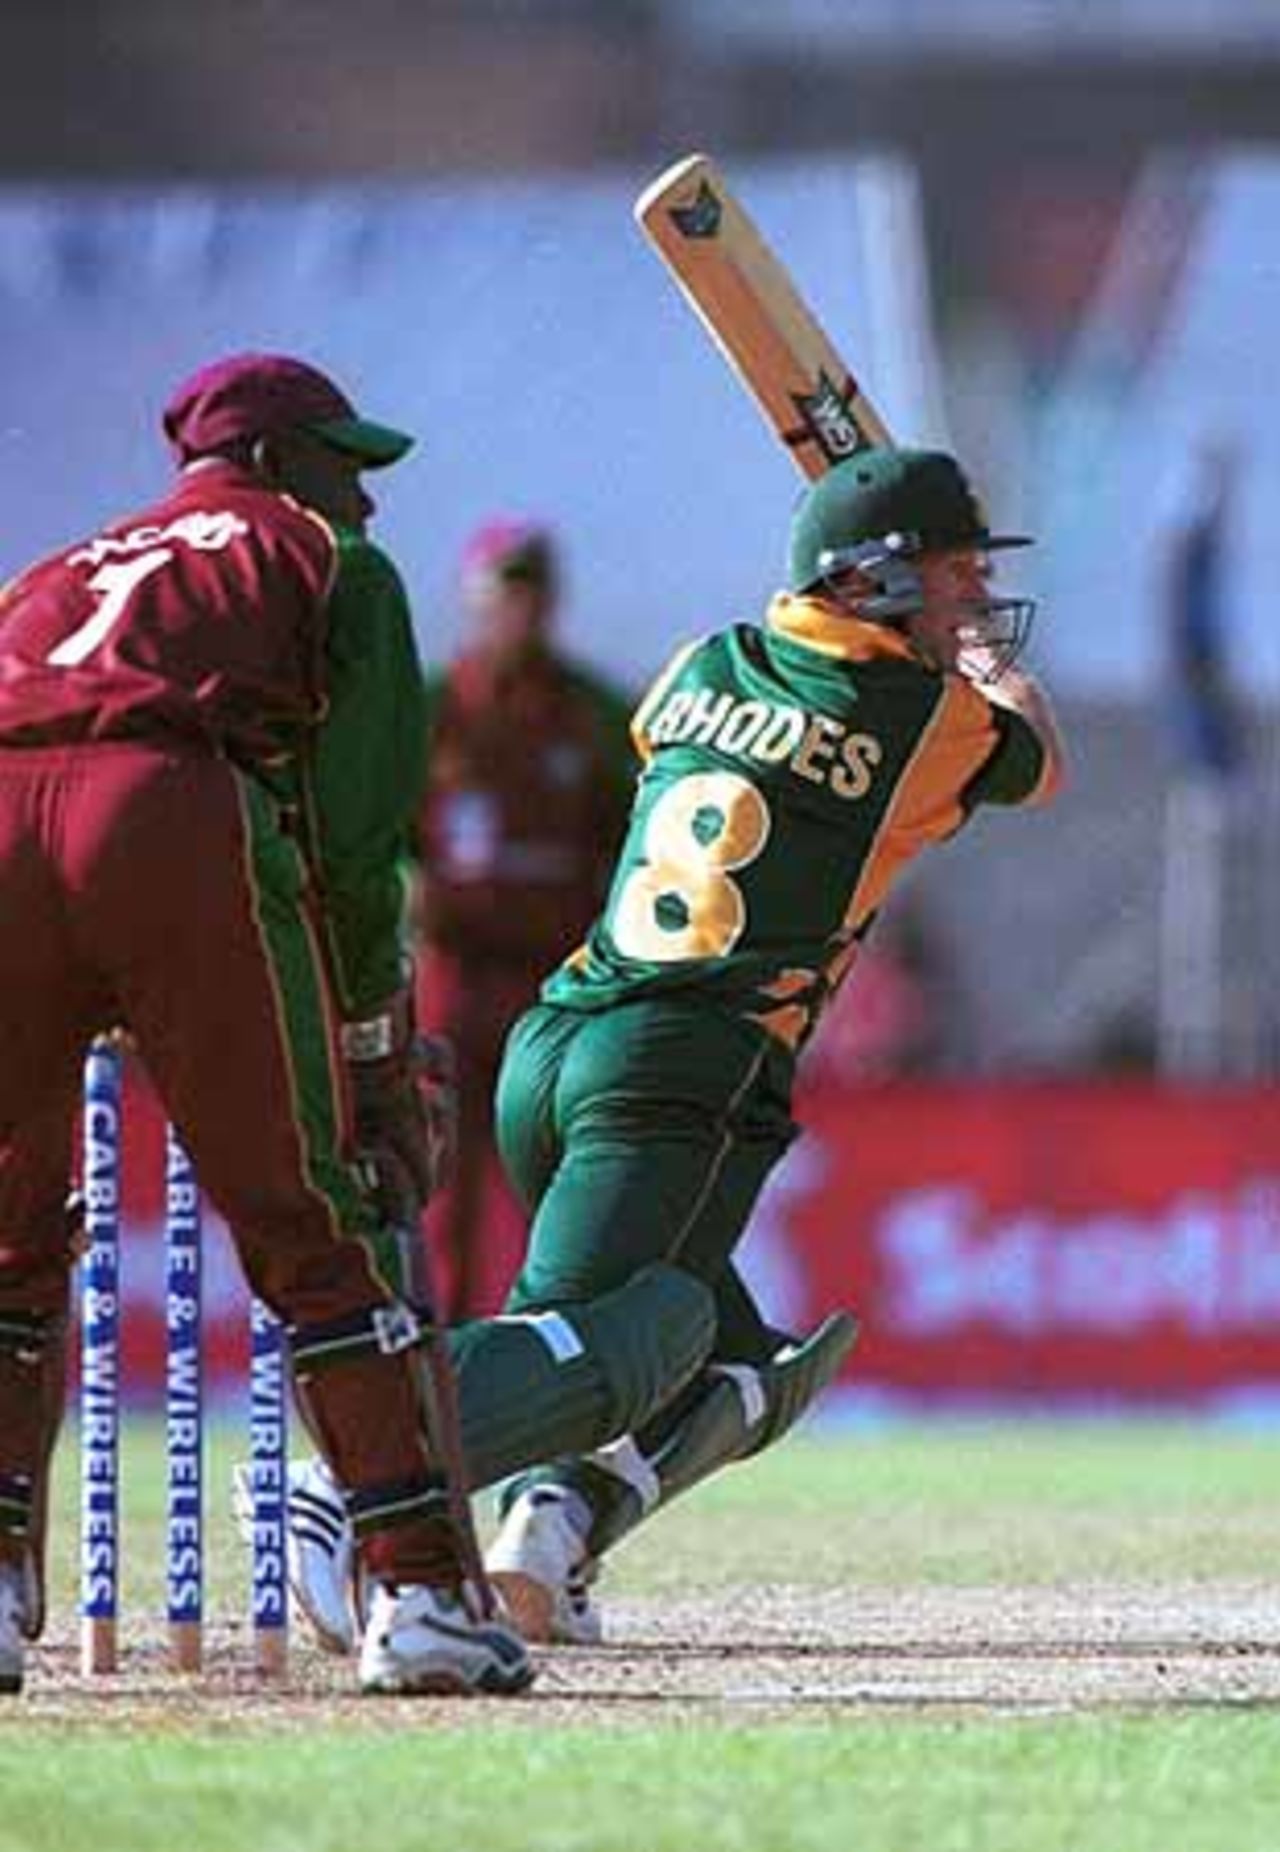 West Indies v South Africa 4th ODI, Queen's Park (New) St George's Grenada, 6th May 2001